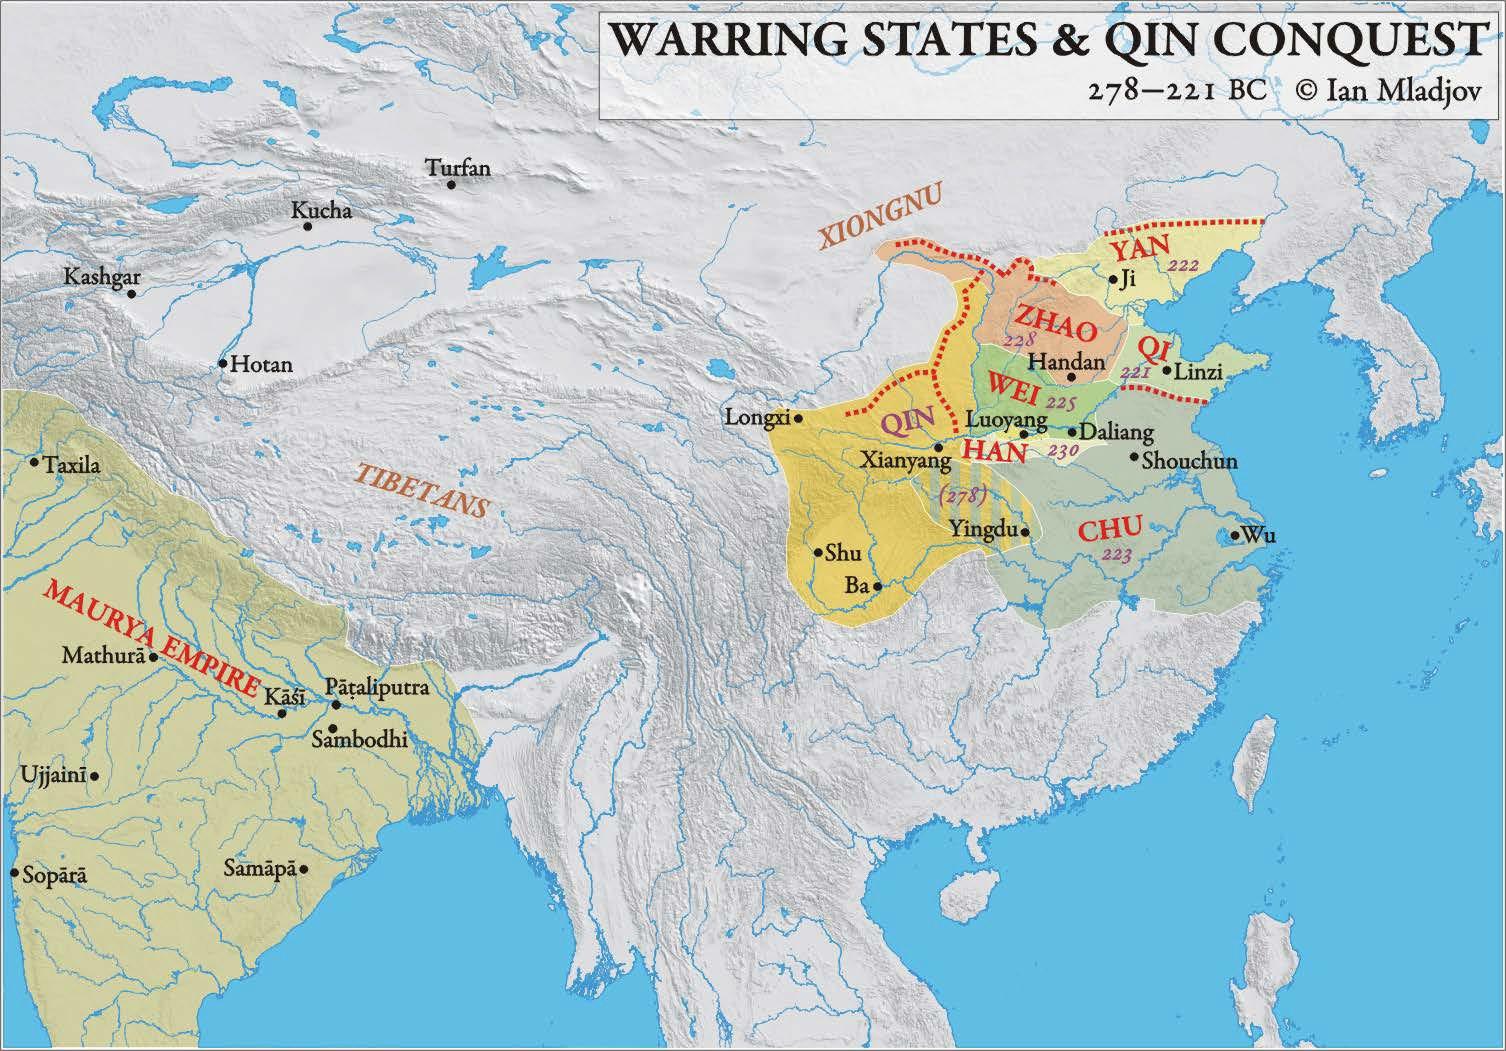 Map of Warring States & Qin Conquest